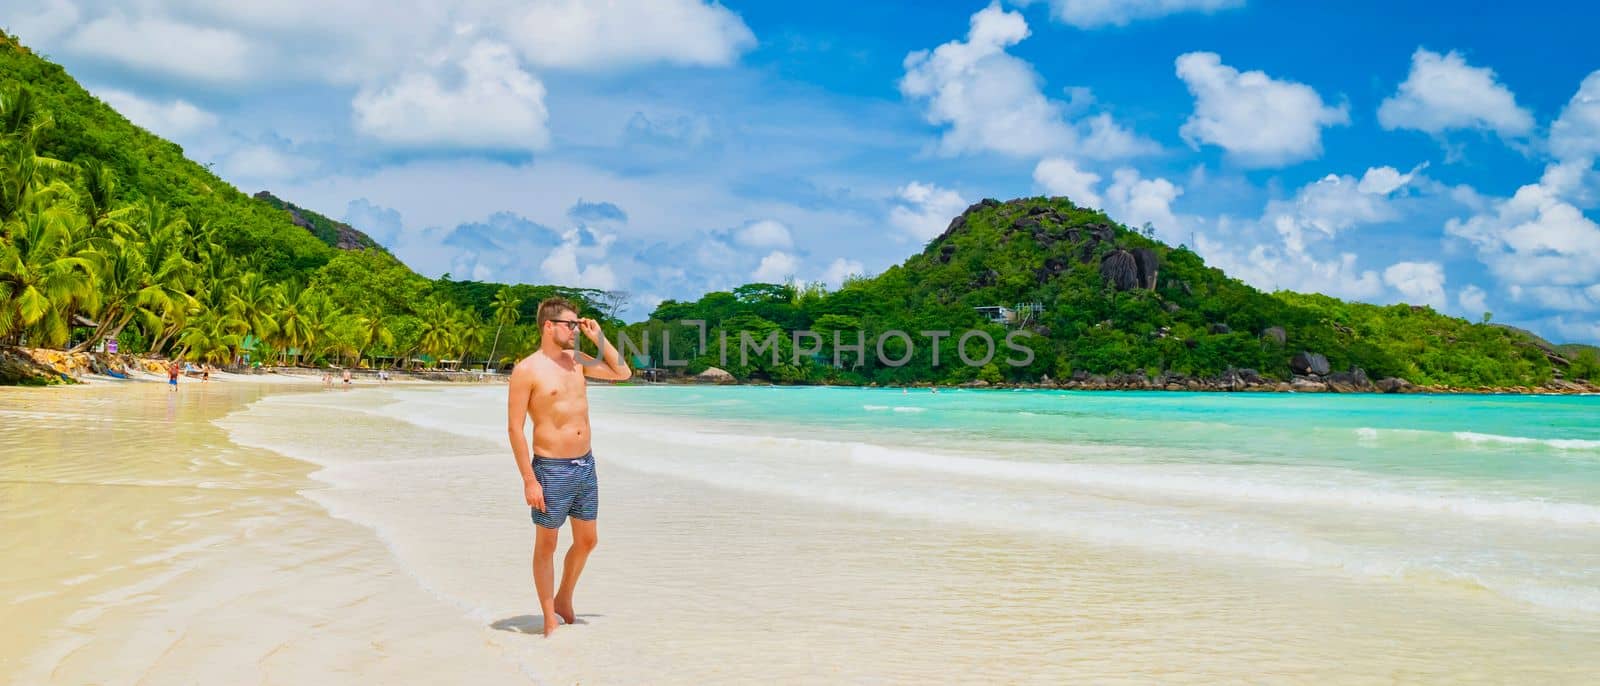 young tanning men in swim short at a white tropical beach with turquoise colored ocean Anse Volbert beach Praslin Seychelles.